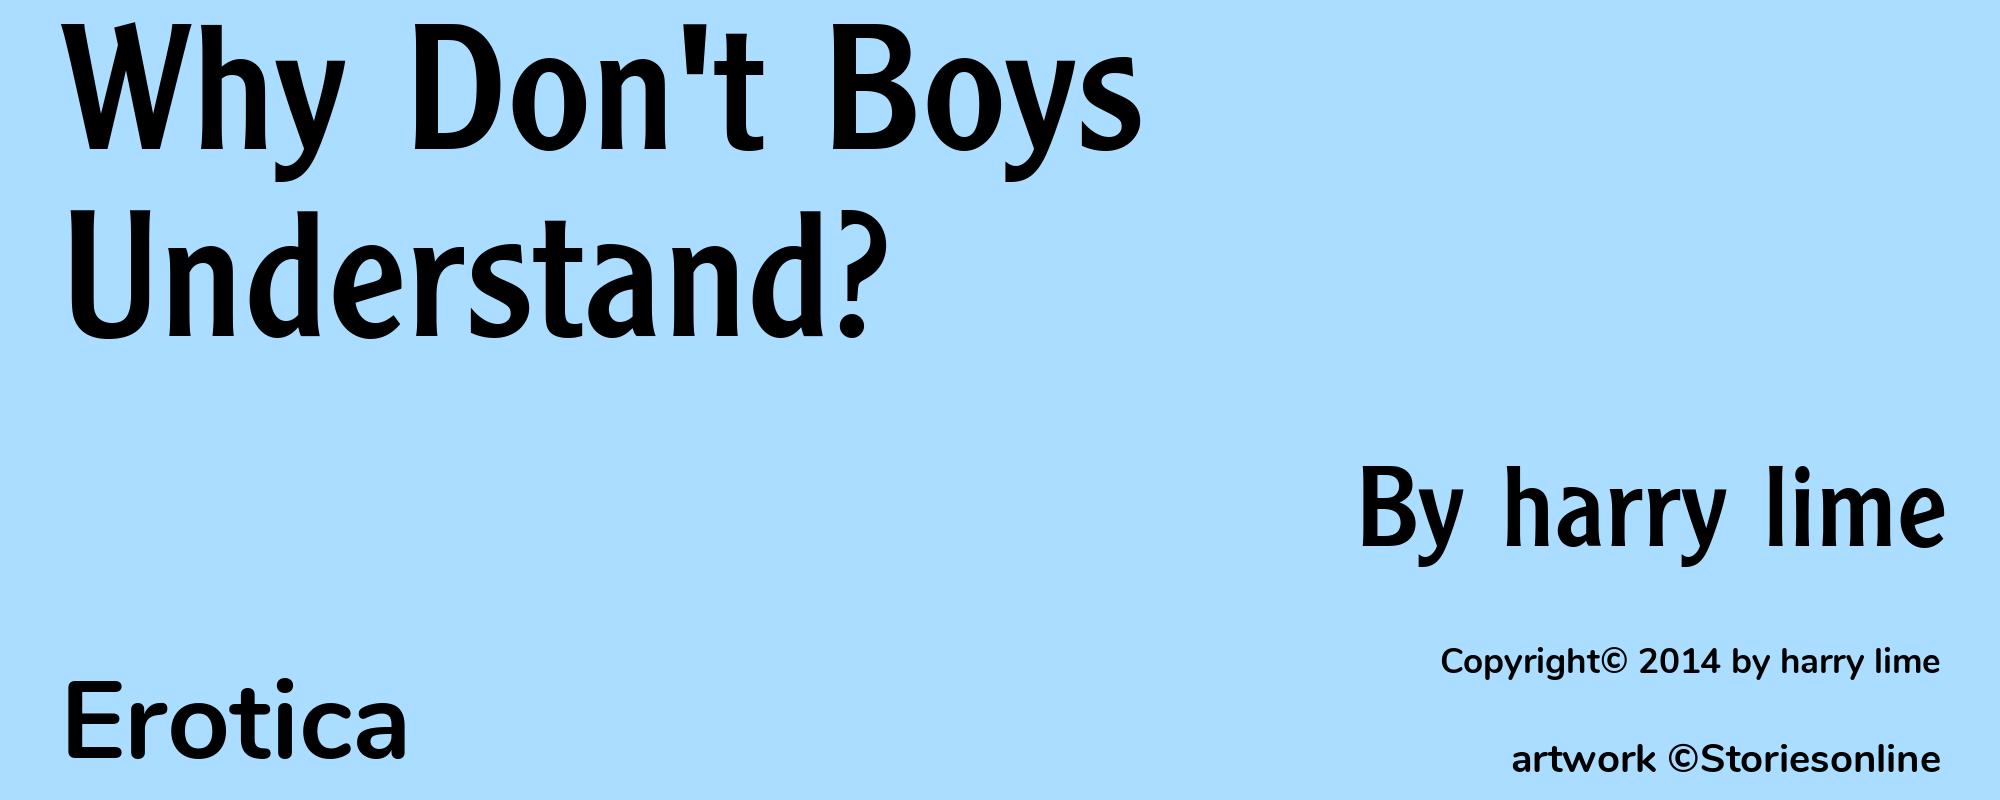 Why Don't Boys Understand? - Cover